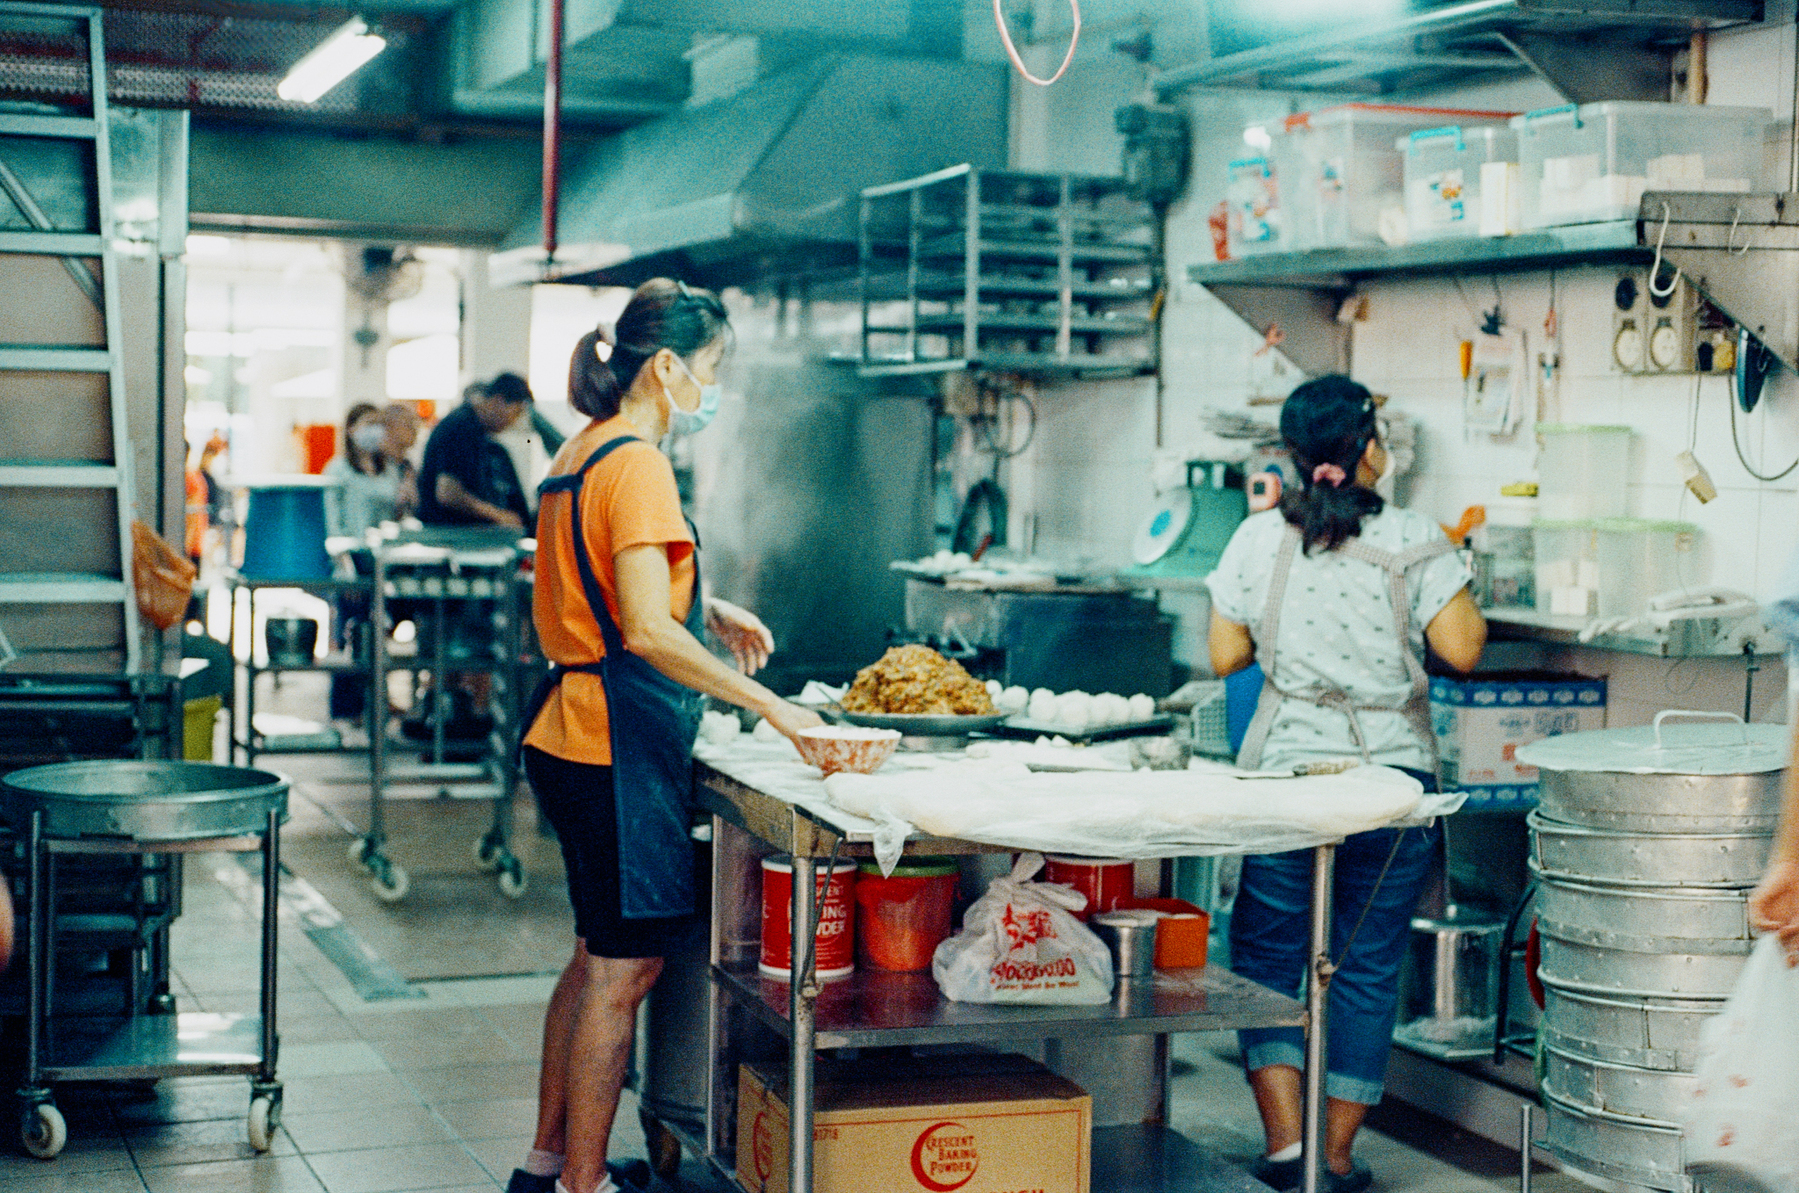 1. A scan of a color photo of two women making buns inside a food market